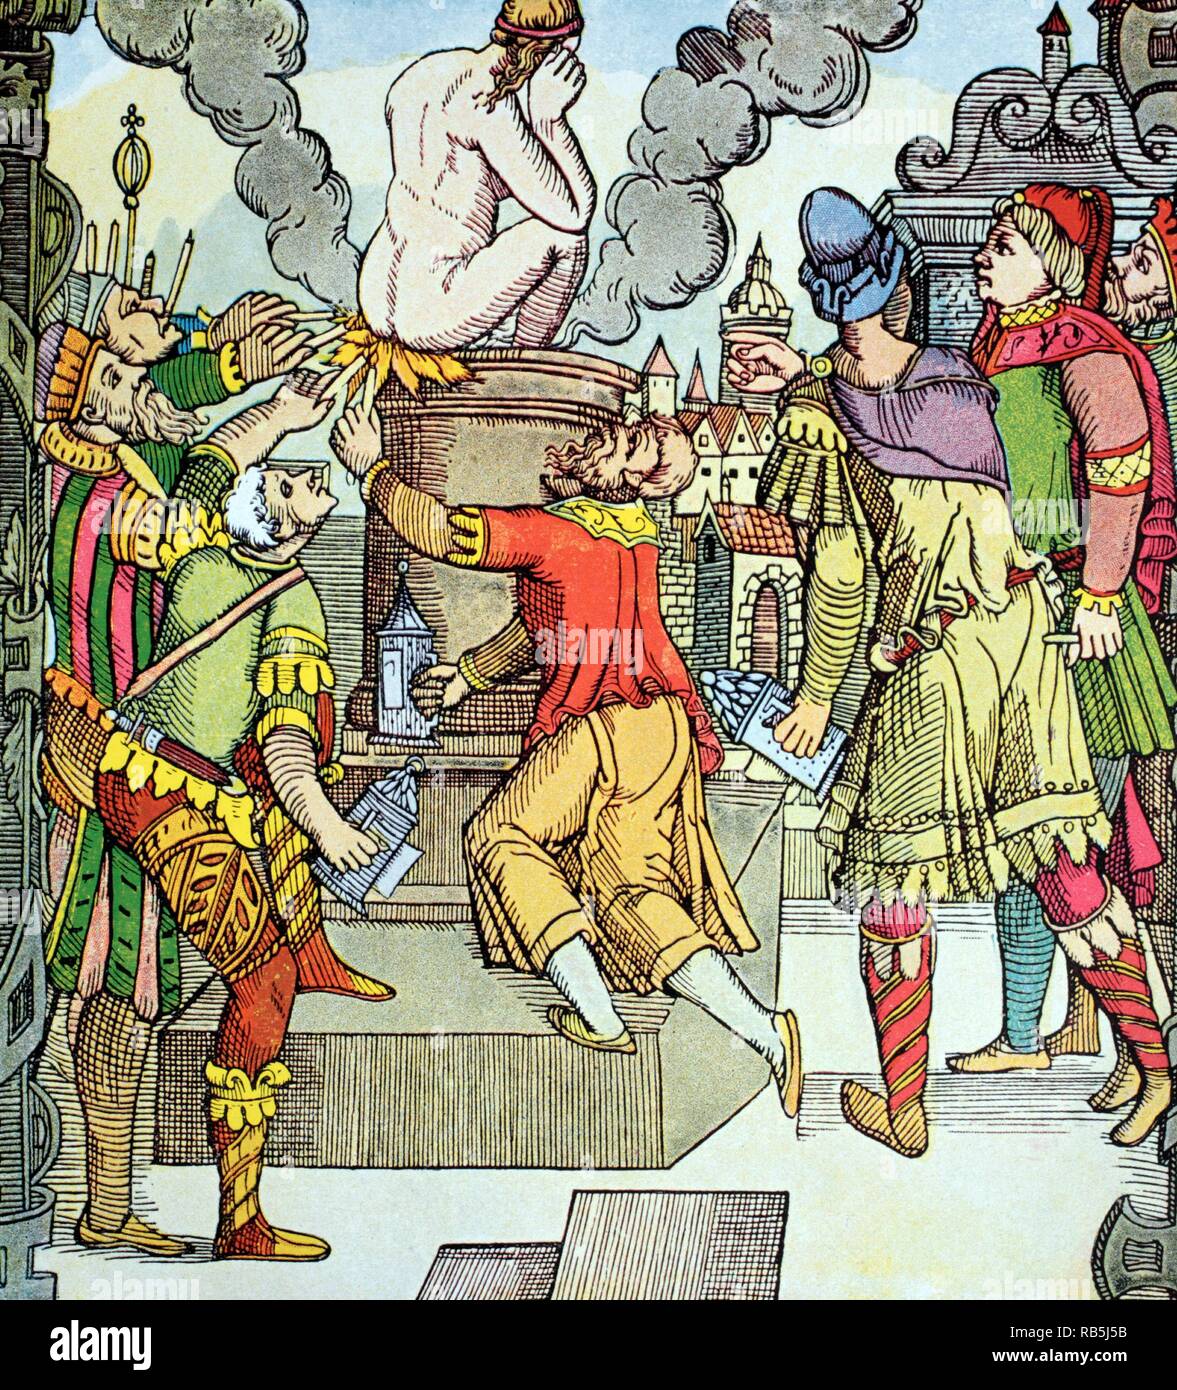 Virgil's Revenge, woodcut from the 16th century by Virgil Solis, also known as Virgil Solis Stock Photo